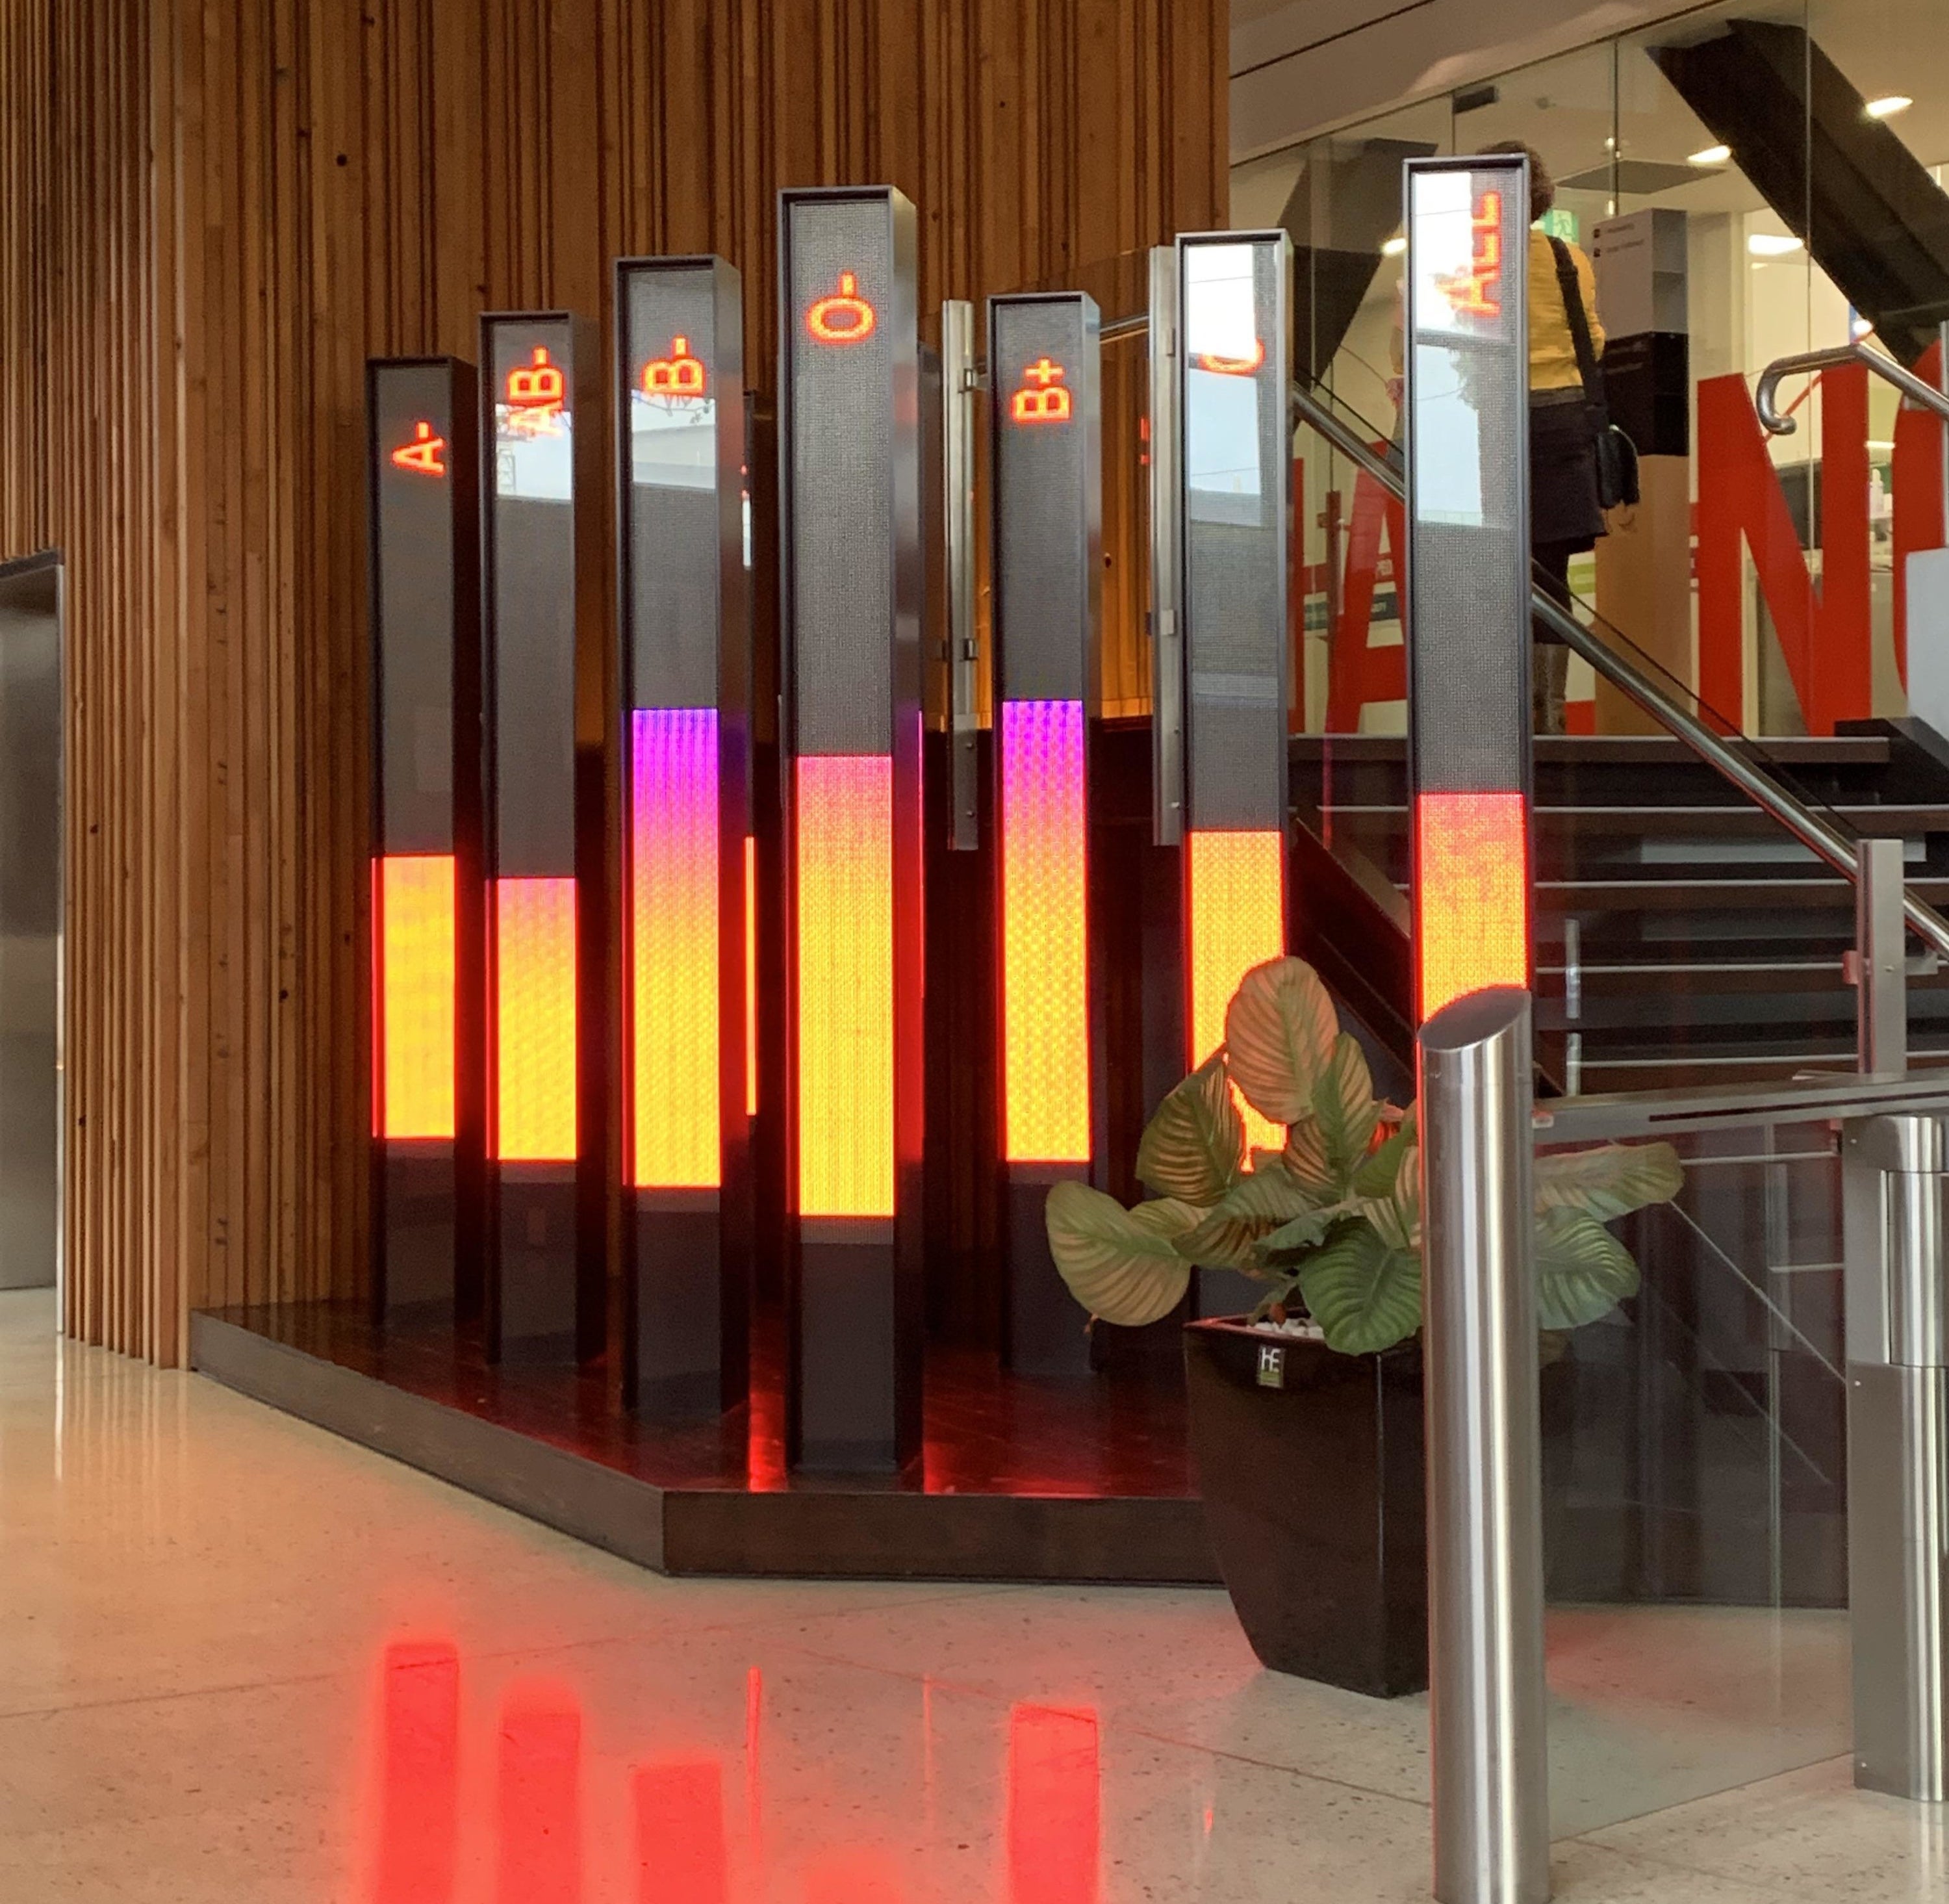 six tall digital displays with different blood types listed and a bar meter keeping track of how much volume each blood type has